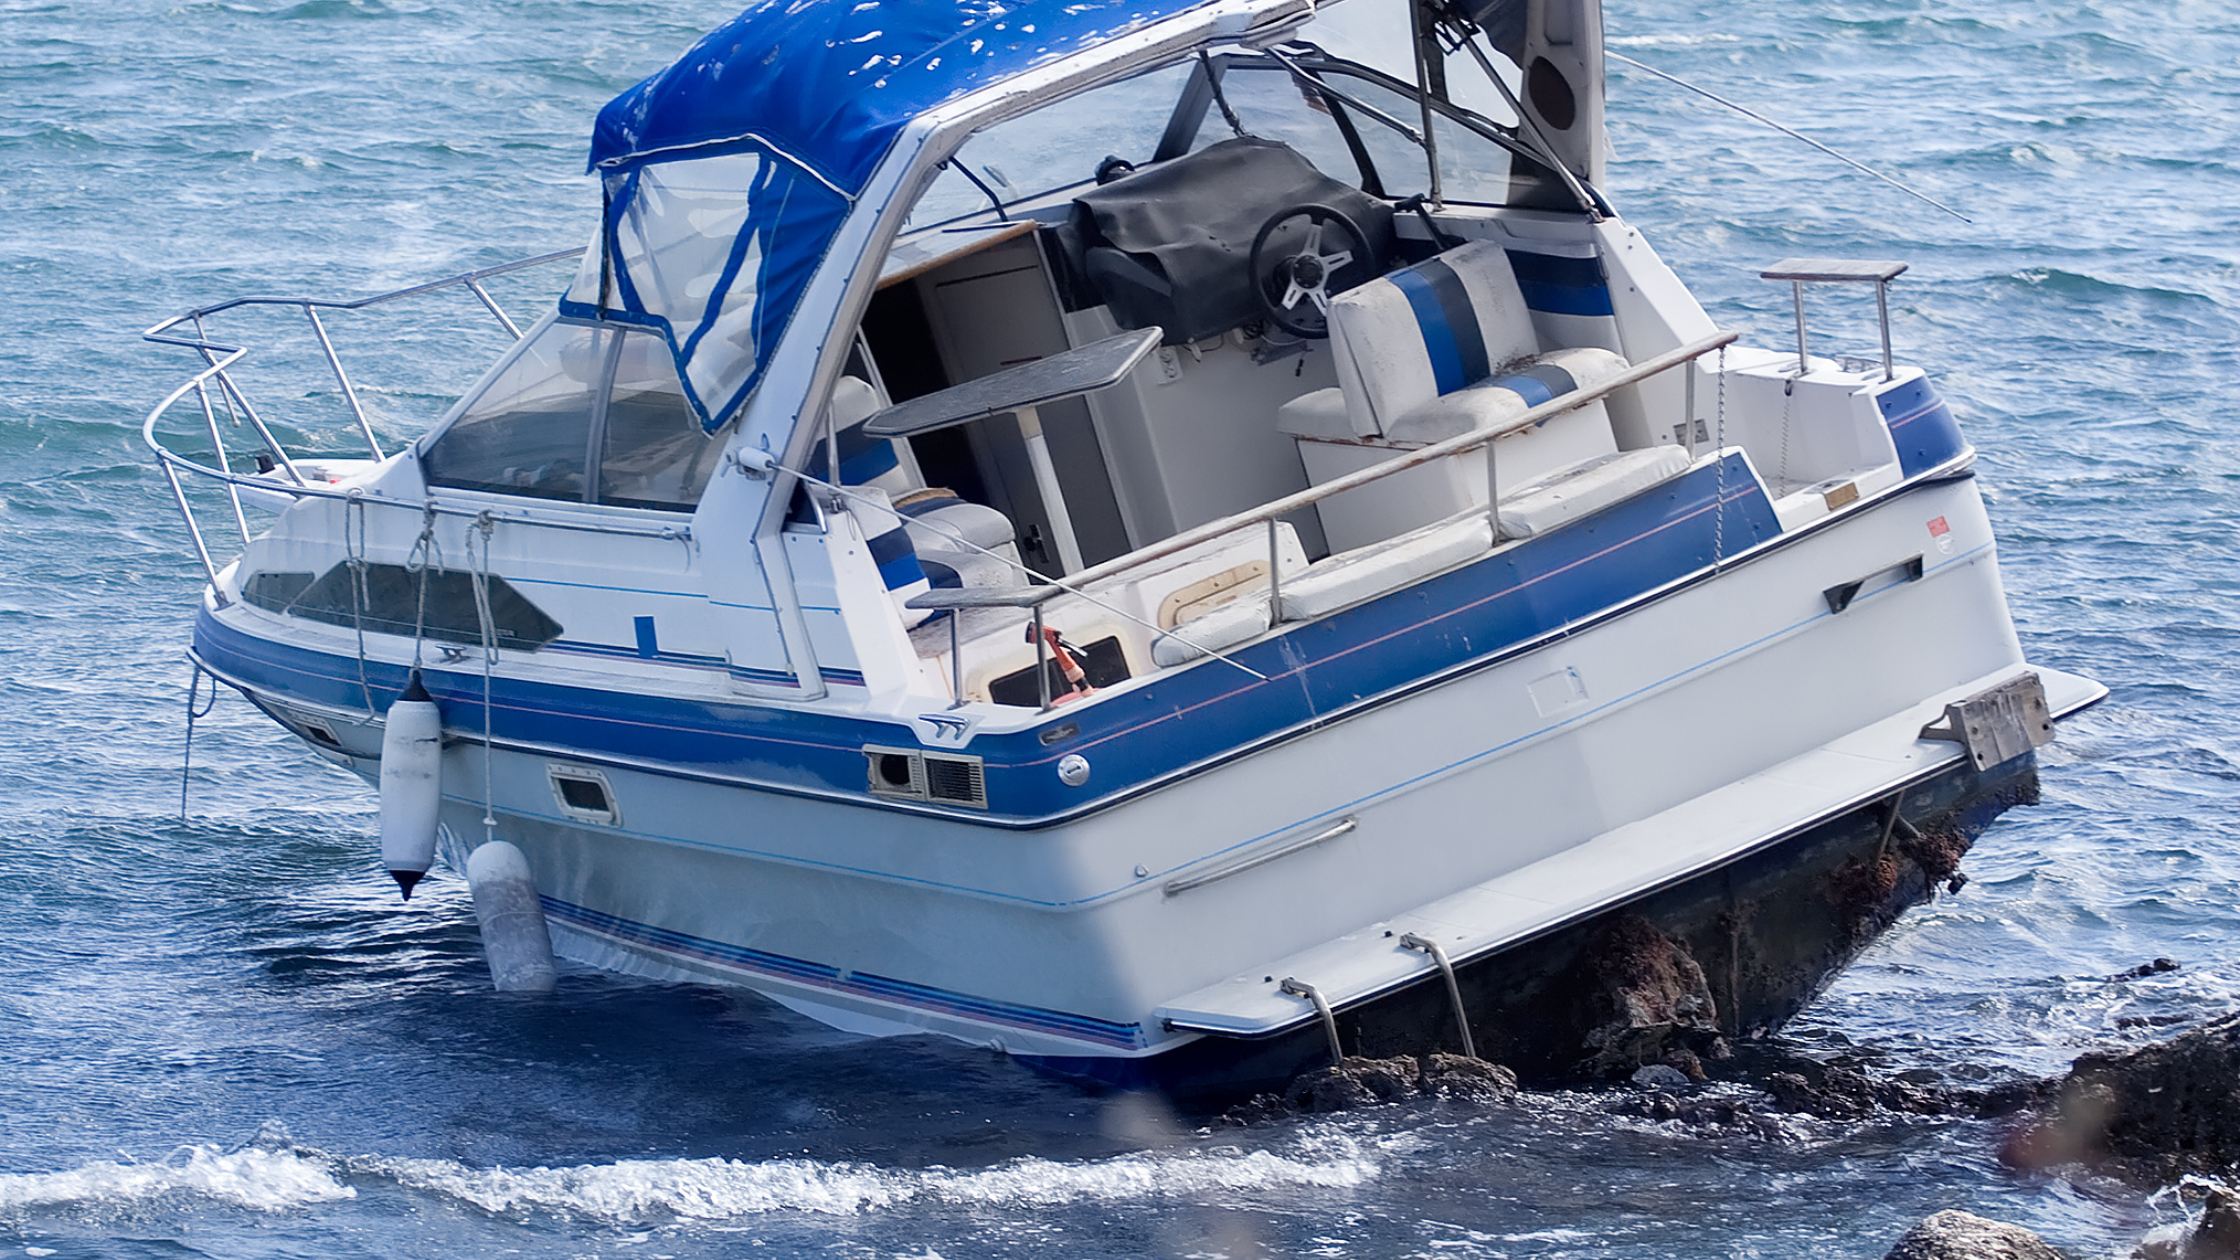 Boat Accident Lawyer In Indio, CA